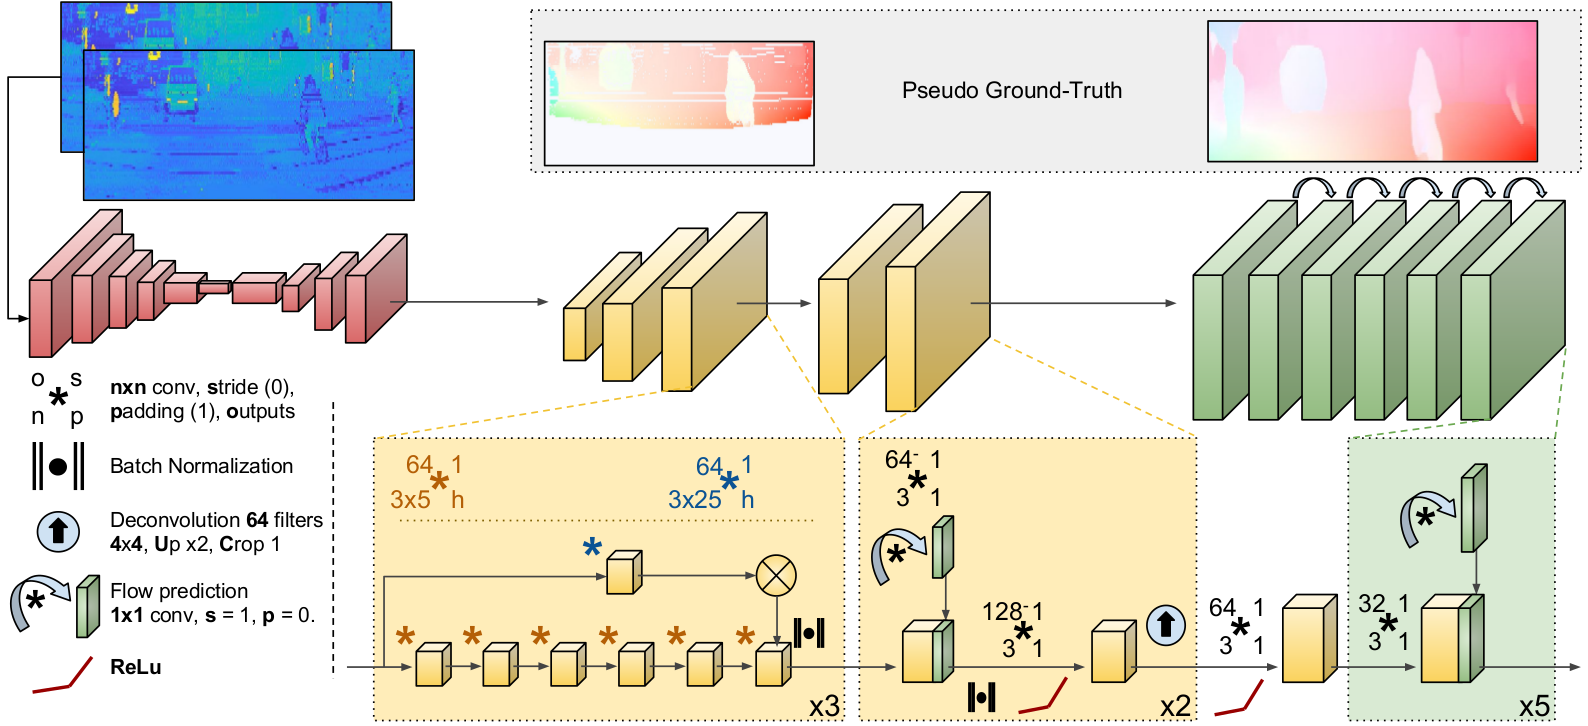 Lidar to dense optical-flow architecture. The proposed network is made of three main blocks sequentially connected which resolve the problem in different stages: 1) Estimation of the lidar-flow in low resolution (red layers); 2) Low-to-high resolution flow transformation and lidar-to-image domain change (yellow layers); 3) Final flow refinement (green layers).